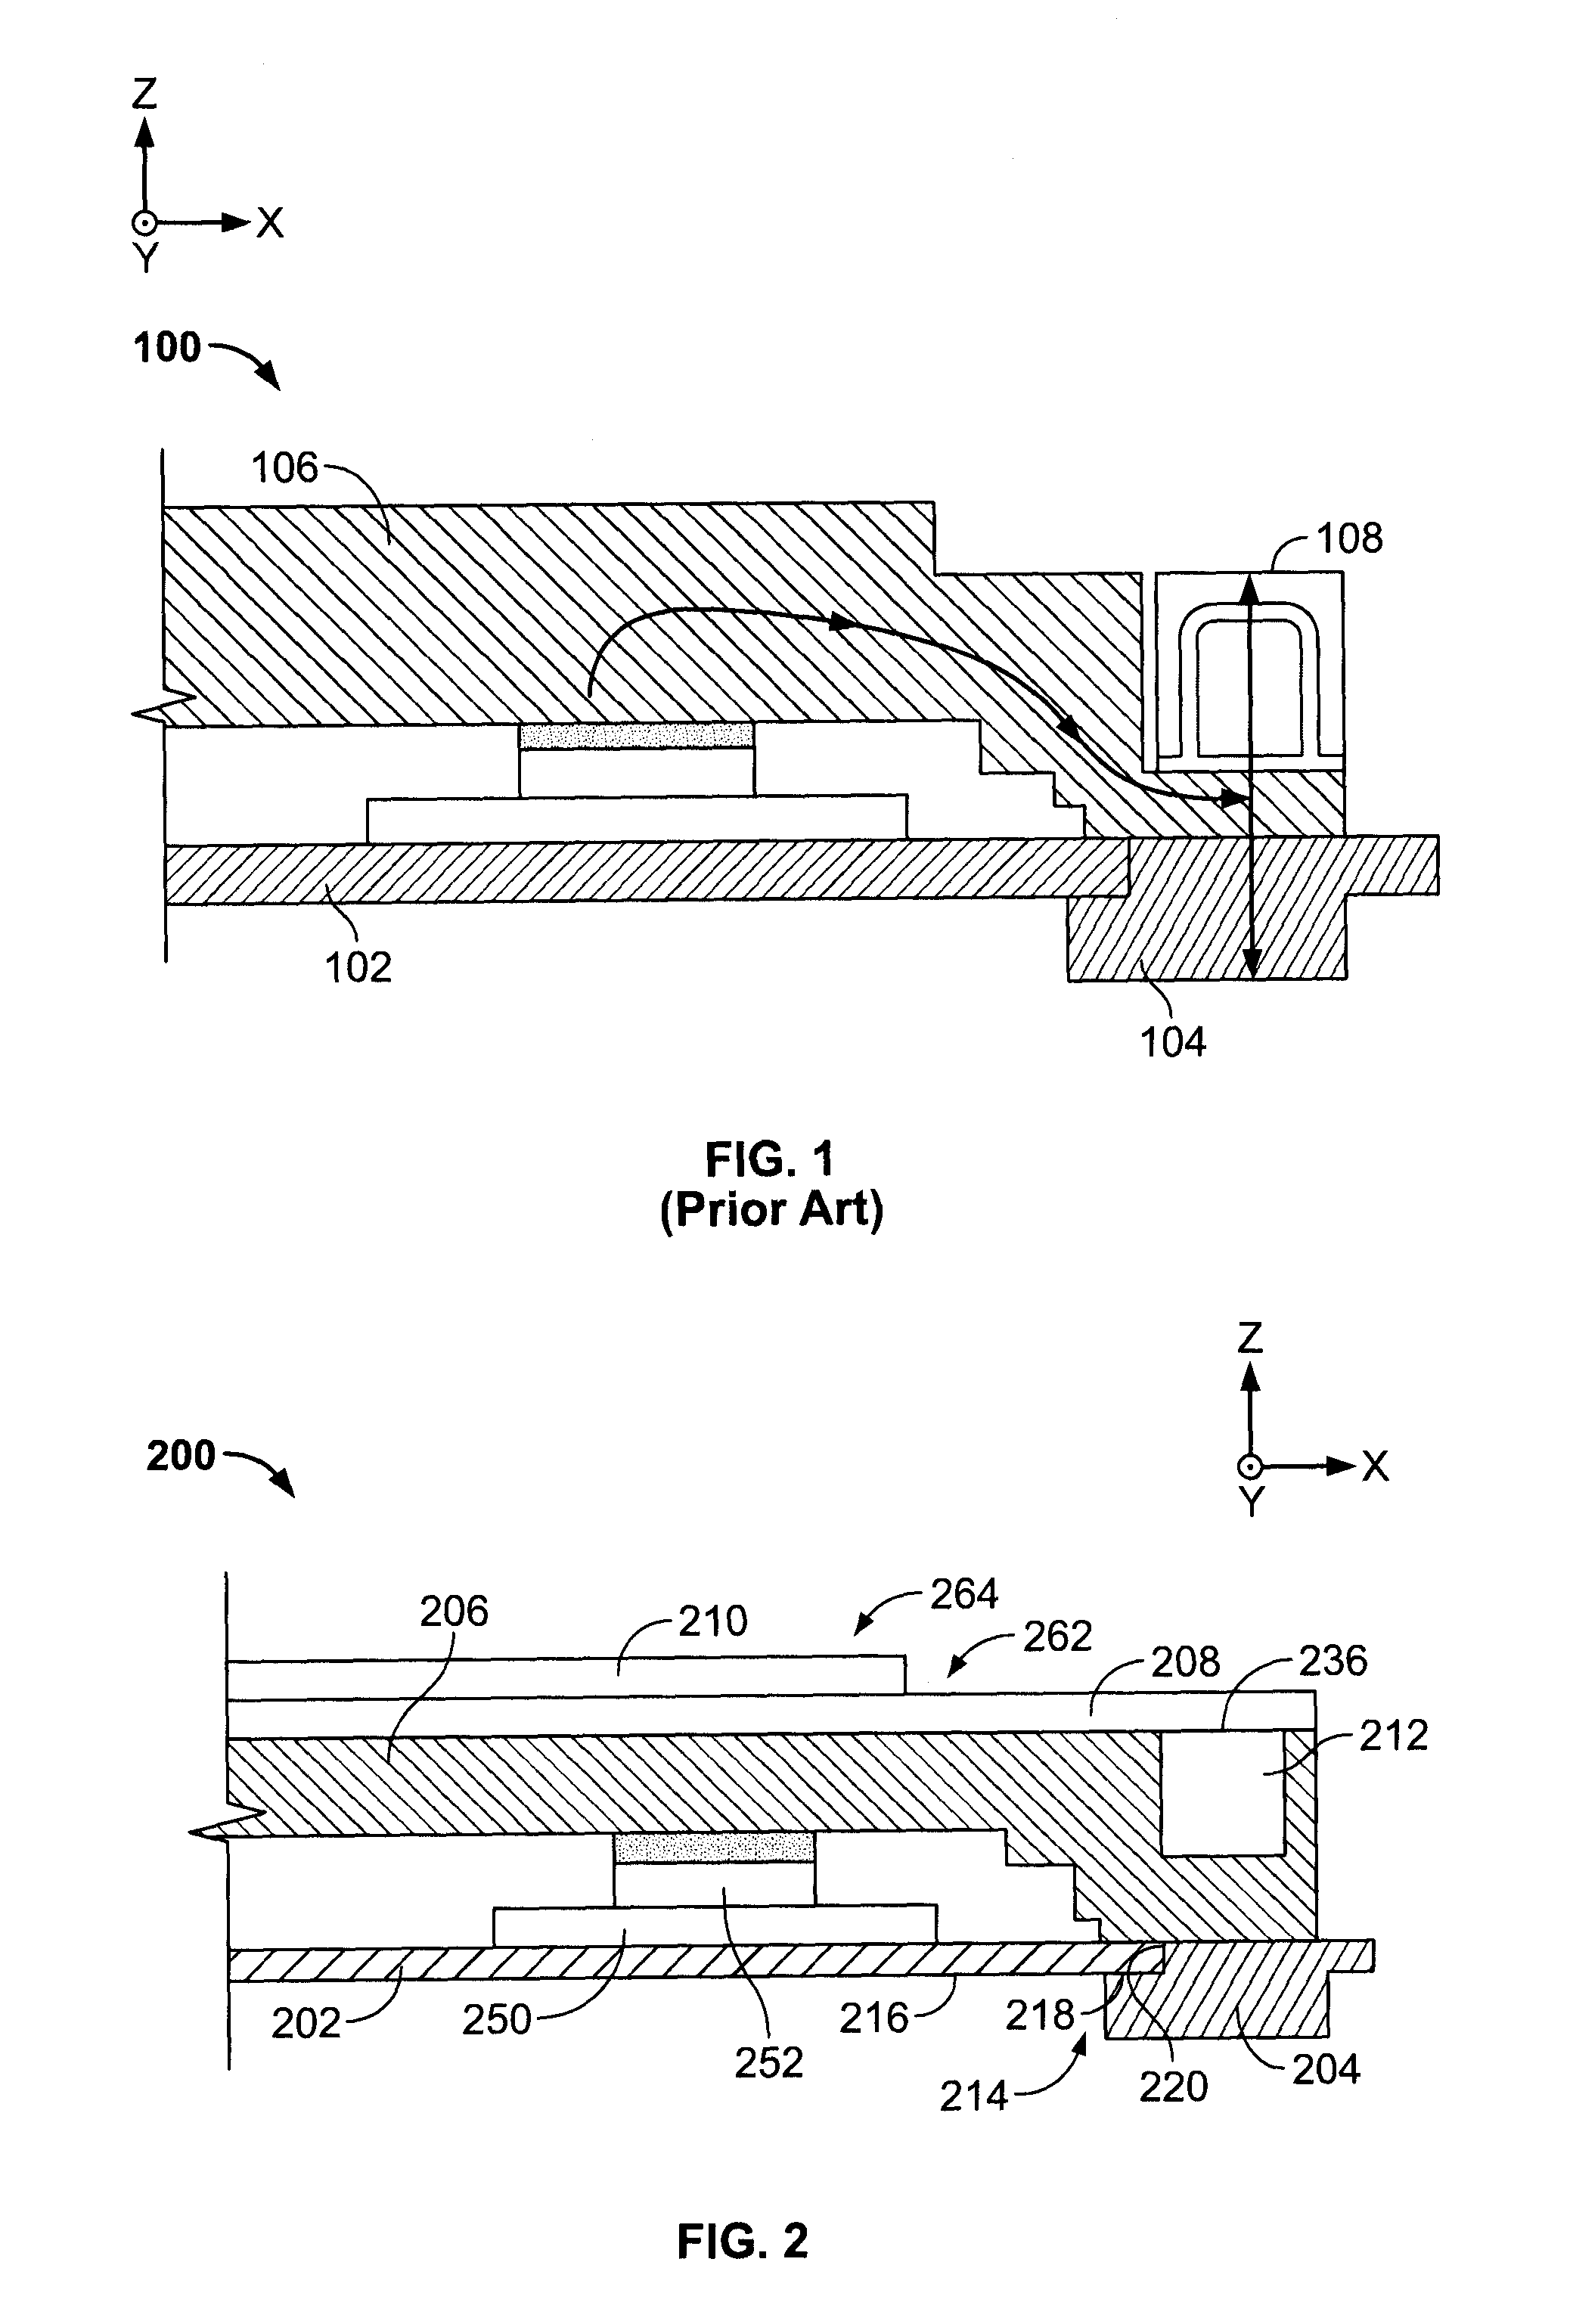 Wedge lock for use with a single board computer, a single board computer, and method of assembling a computer system